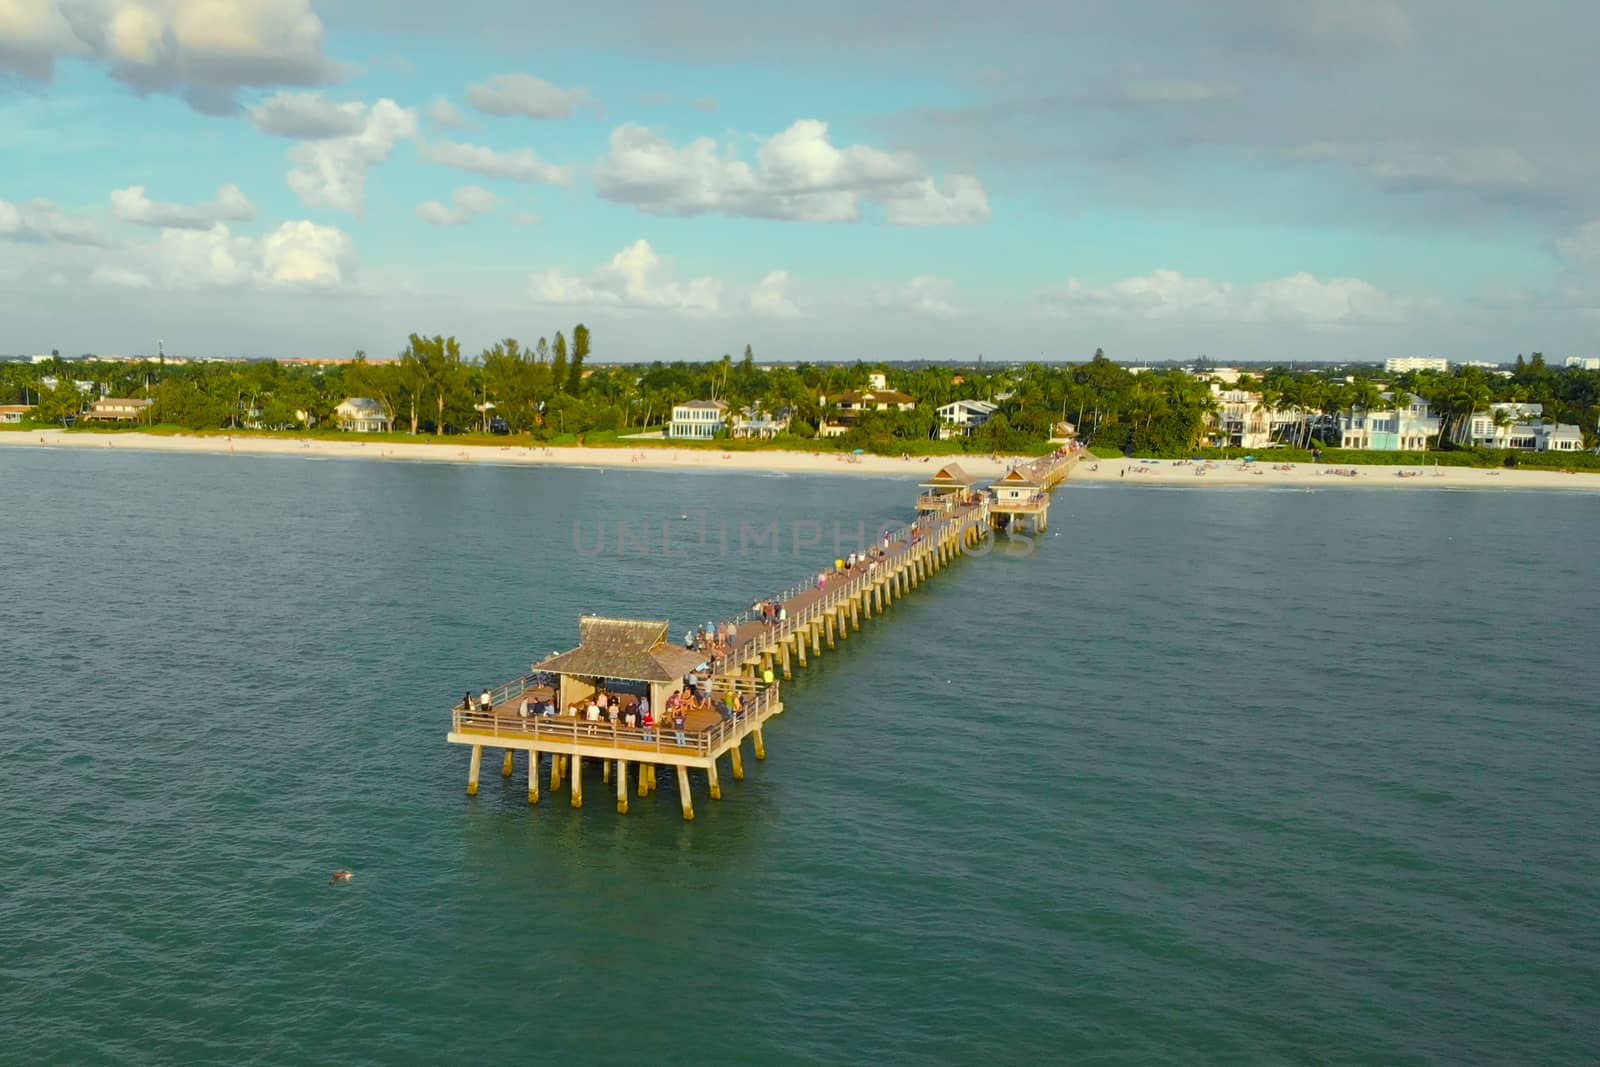 Drone flies around a fishing pier in Naples, Florida USA. Drone flies near a pier in Naples, Florida at sunset time, aerial view. Naples, Florida is a tourist town in the USA, Aerial view photo.